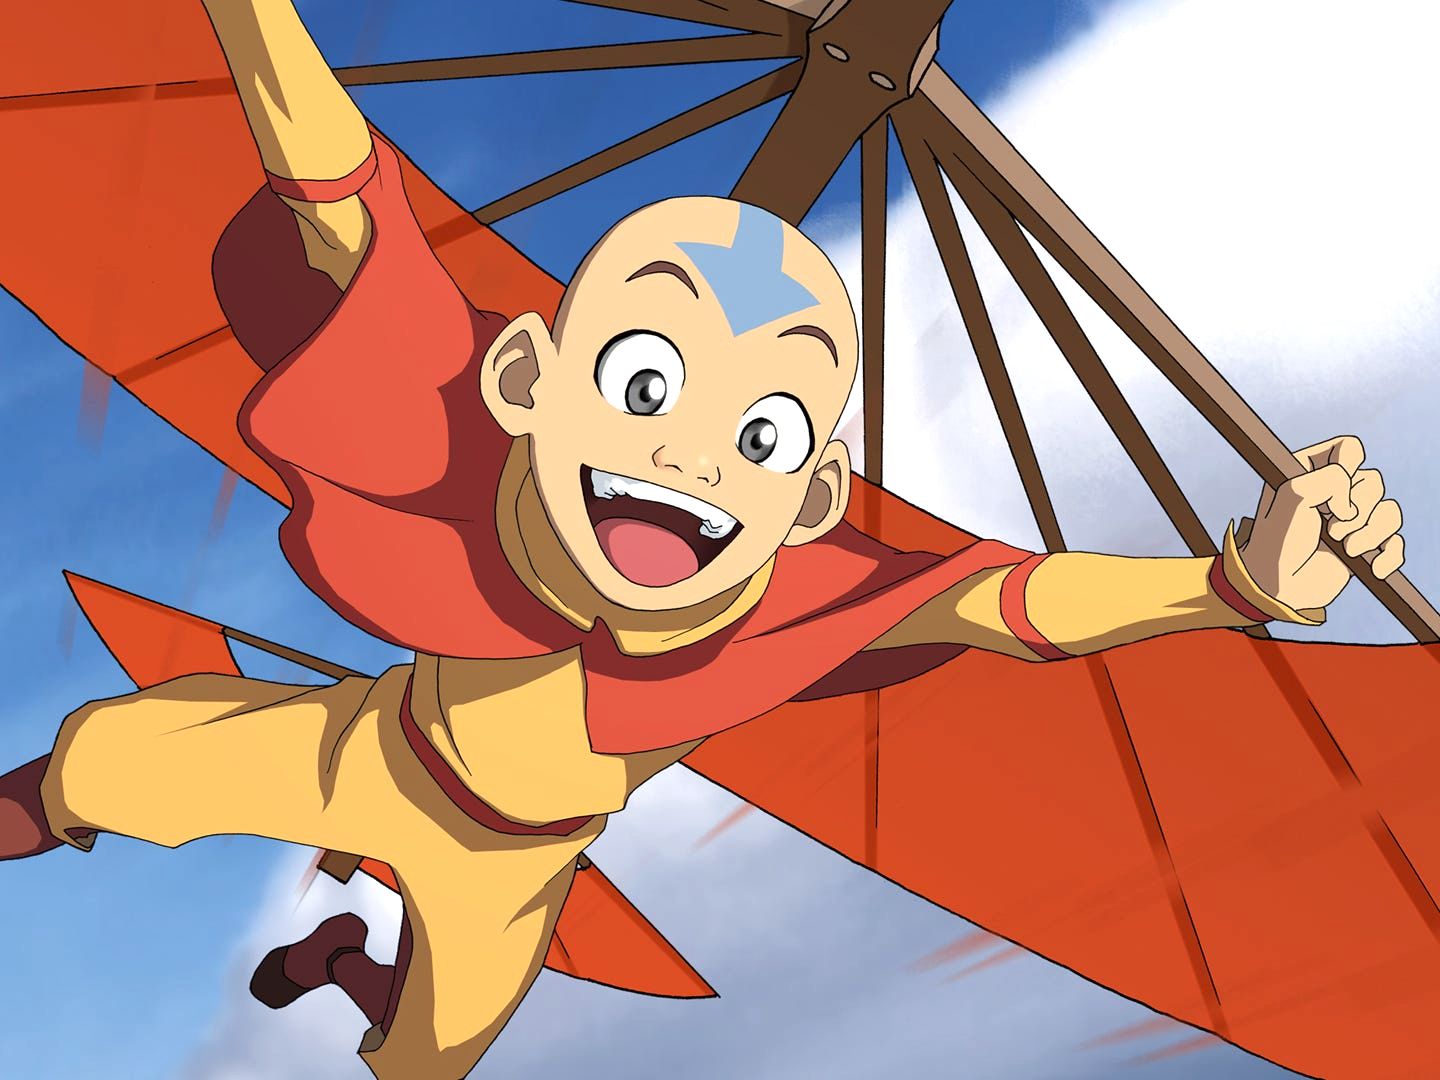 Avatar The Last Airbenders Aang And Zuko Actors Have A Friendly Rivalry  Brewing And Its Getting Fans Hyped For The Netflix Series